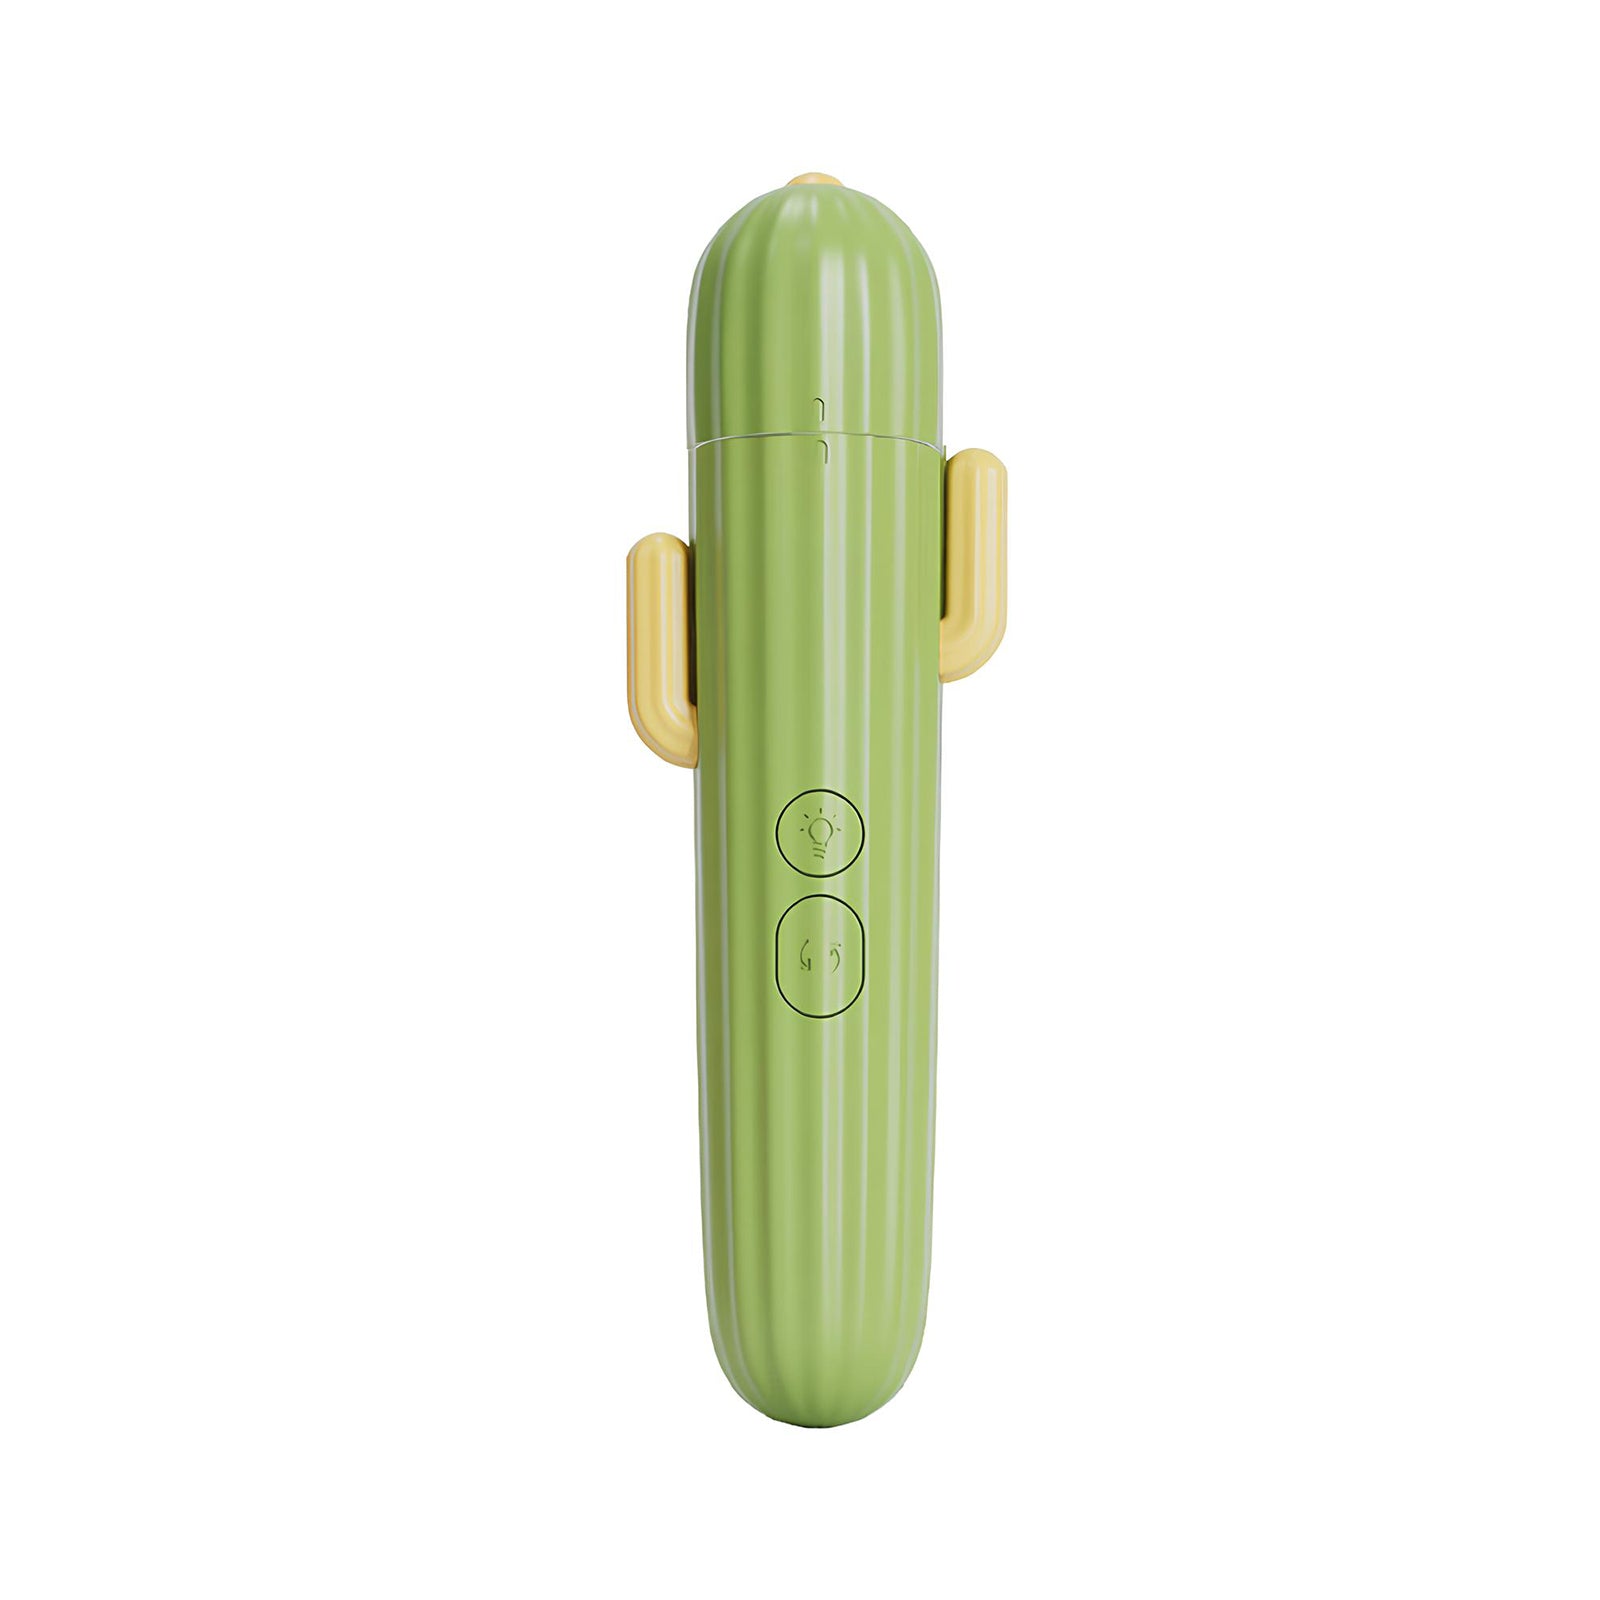 Fluffee Rechargeable Cactus-Shaped Pet Nail Clipper